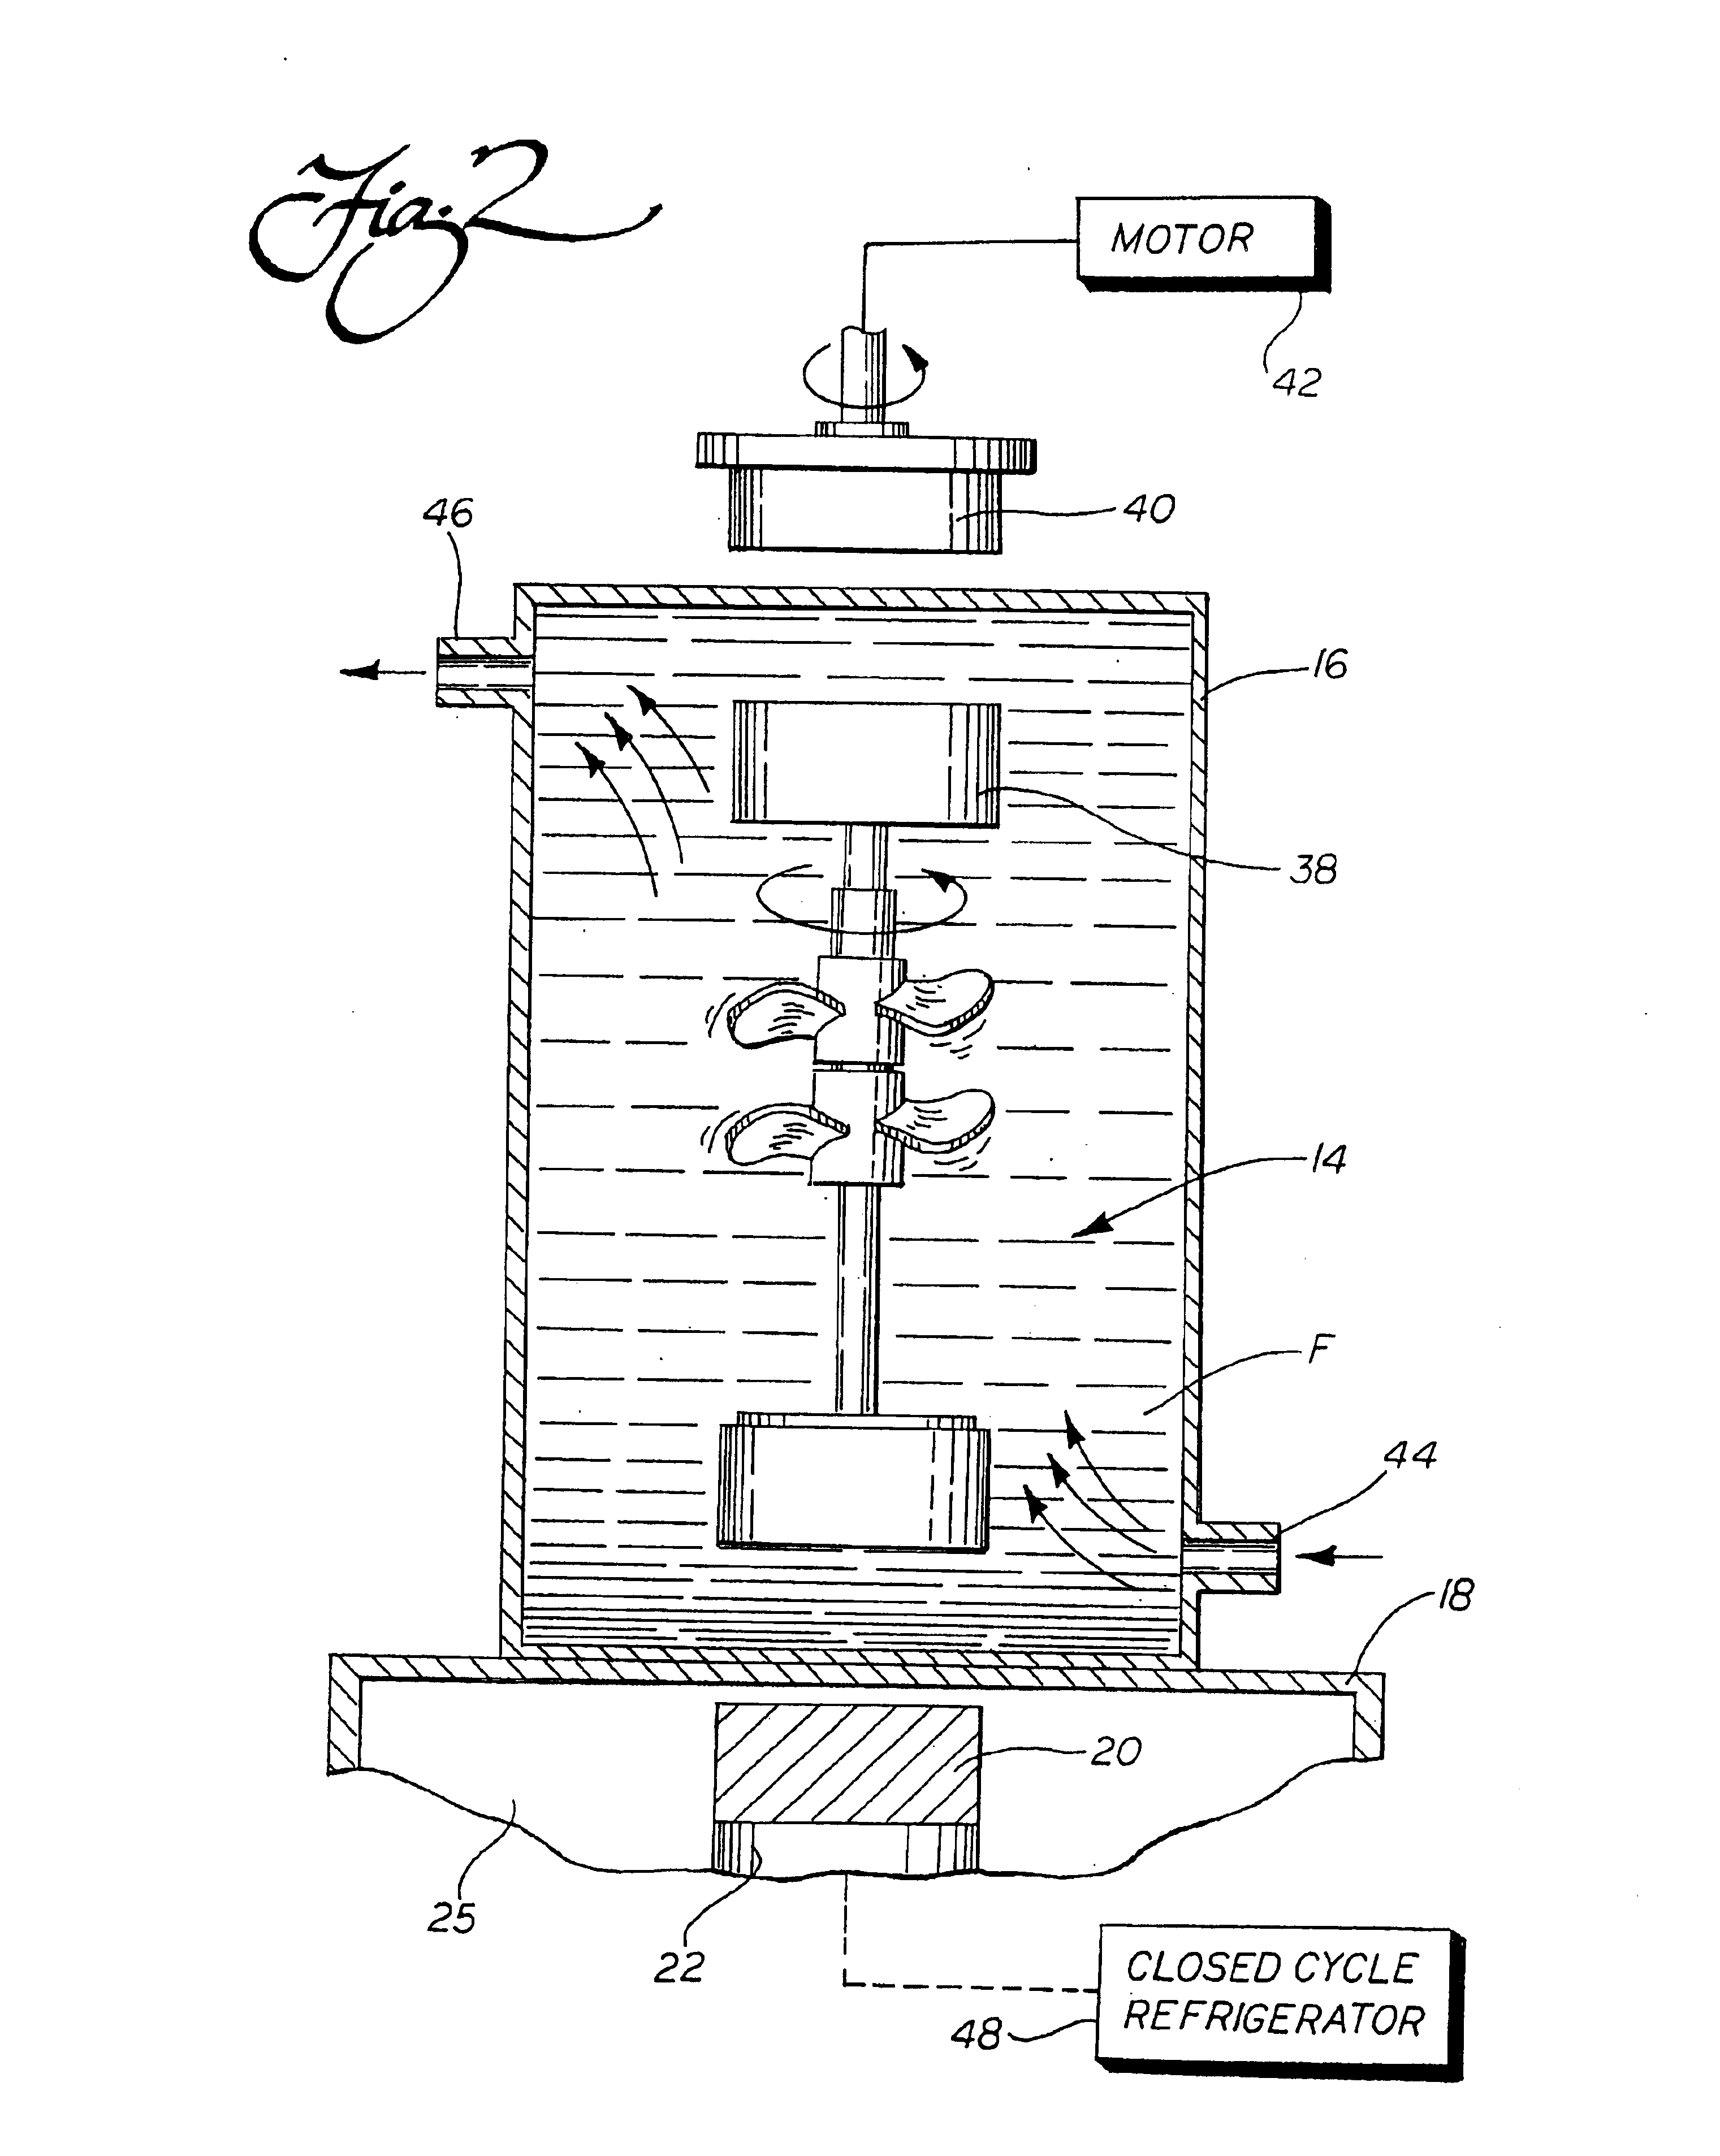 Set-up kit for a pumping or mixing system using a levitating magnetic element